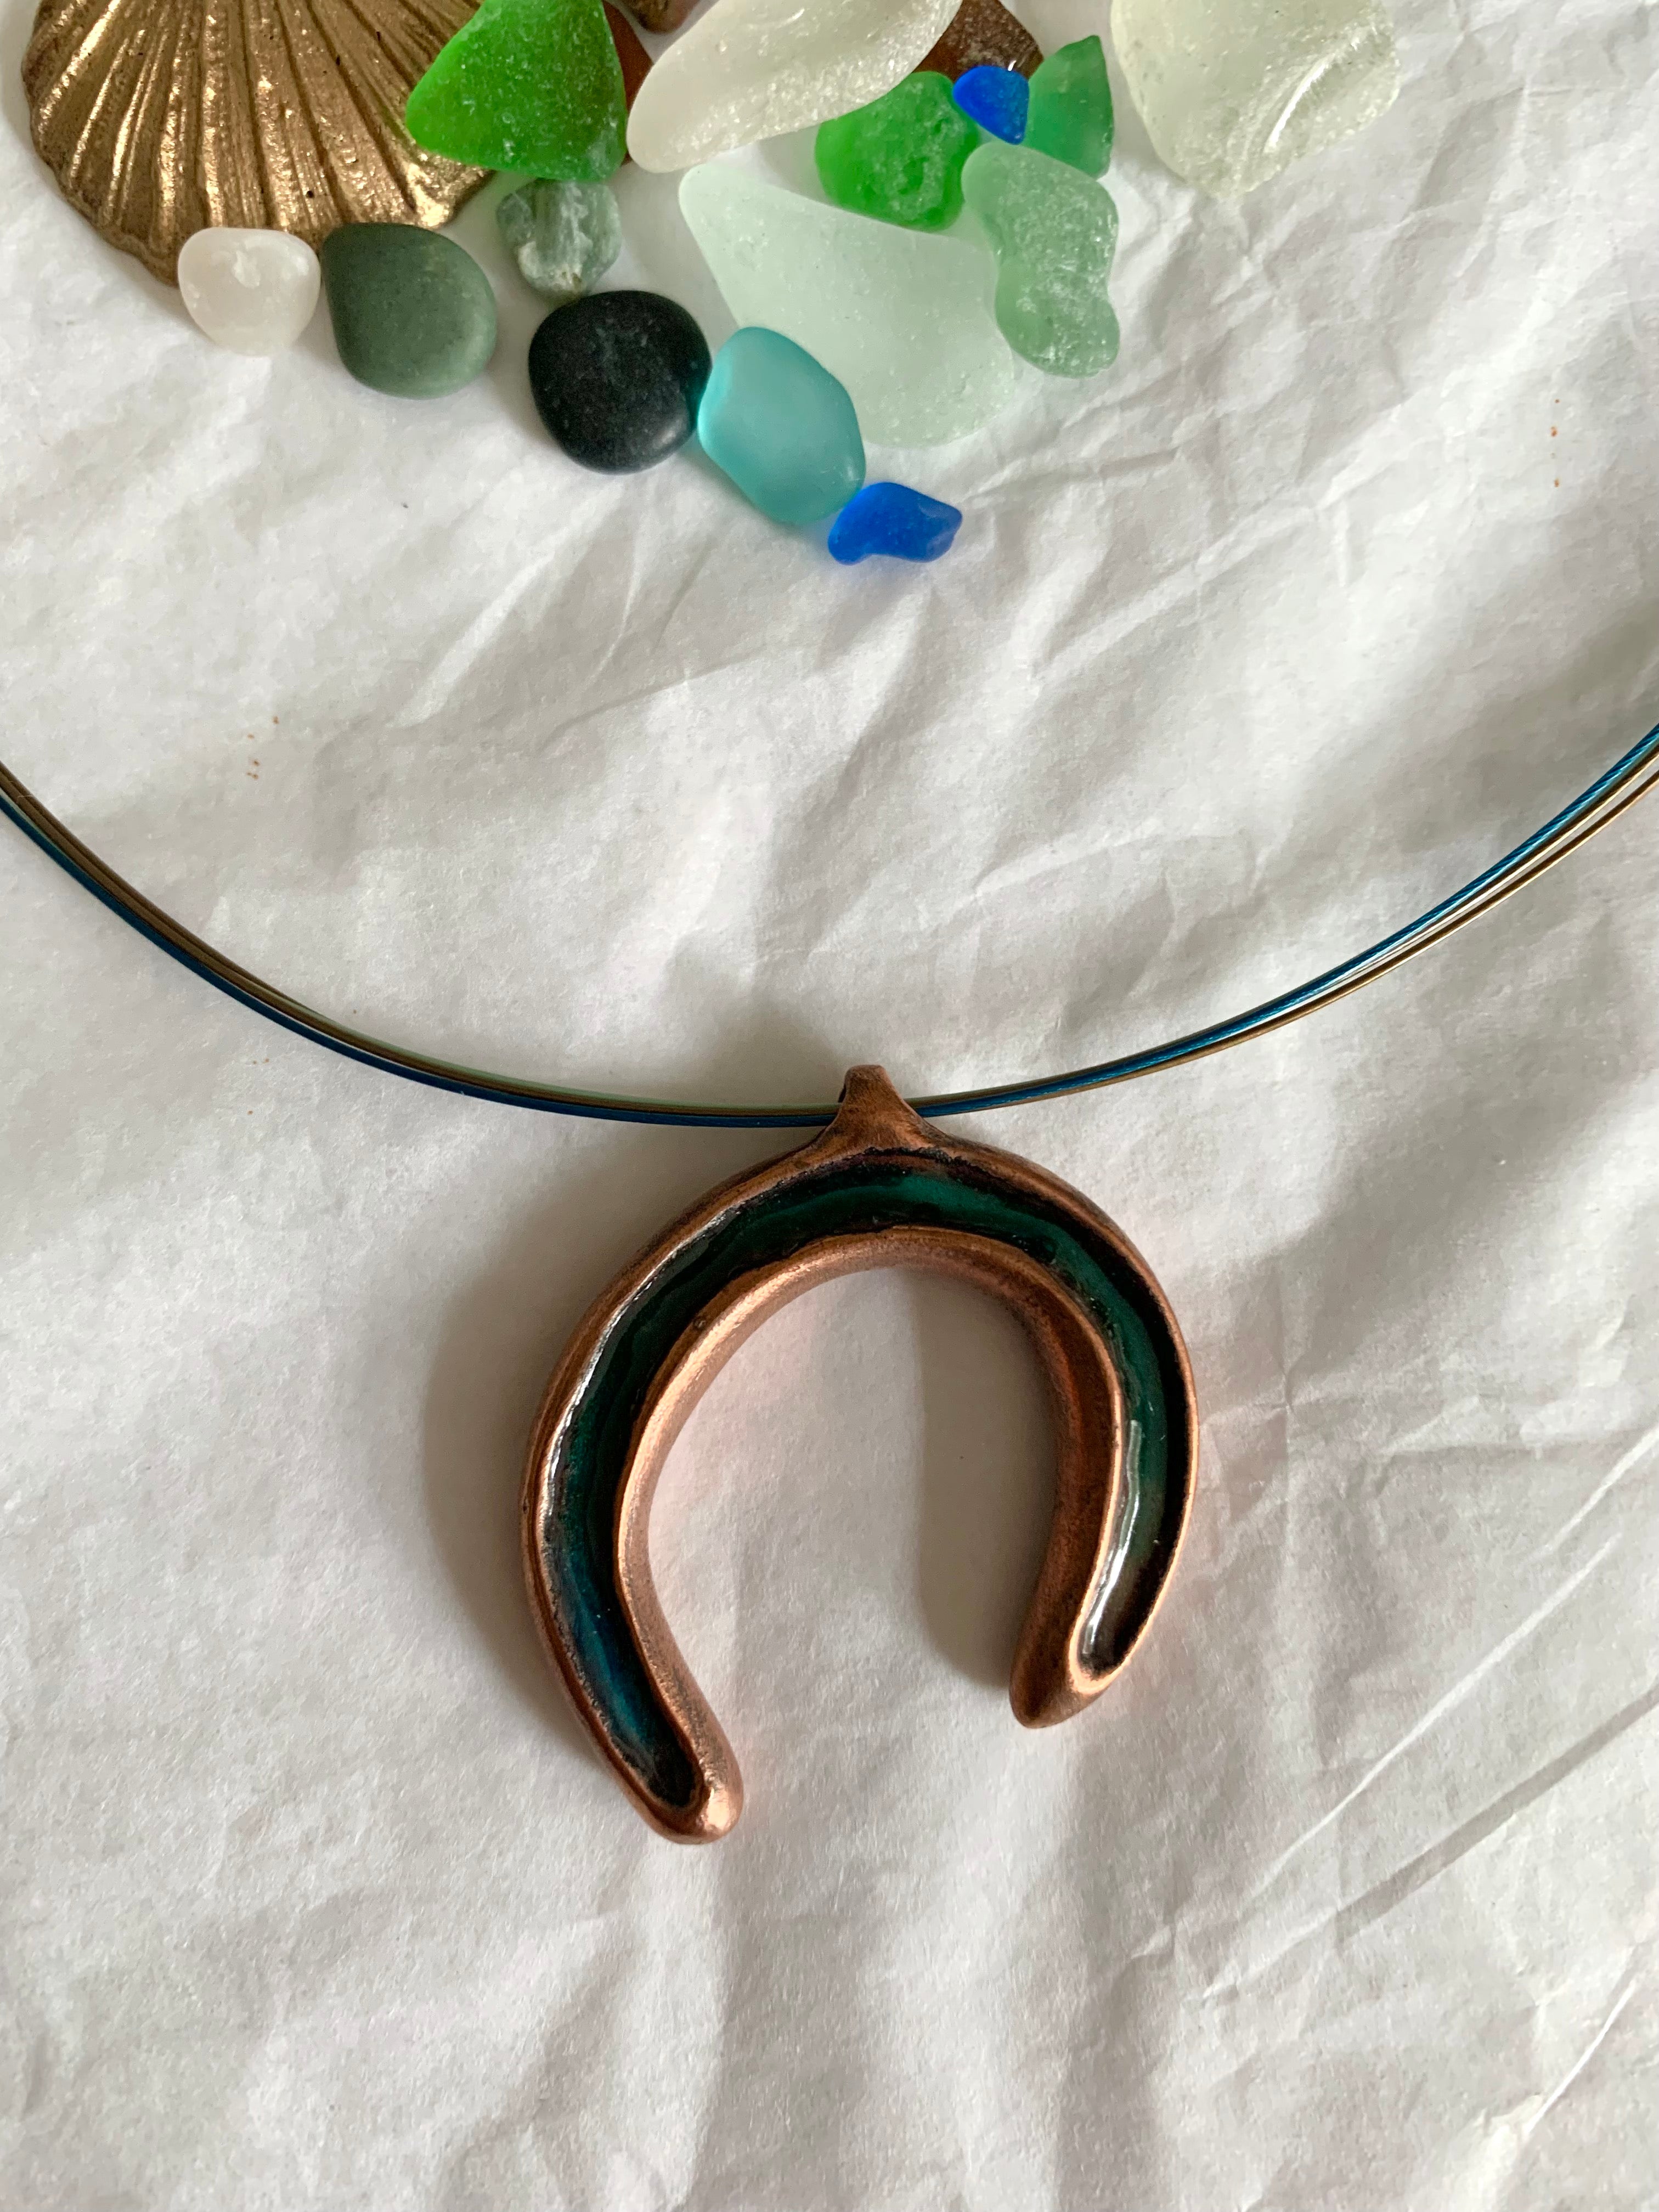 Seaglass with copper ocean inspired necklace